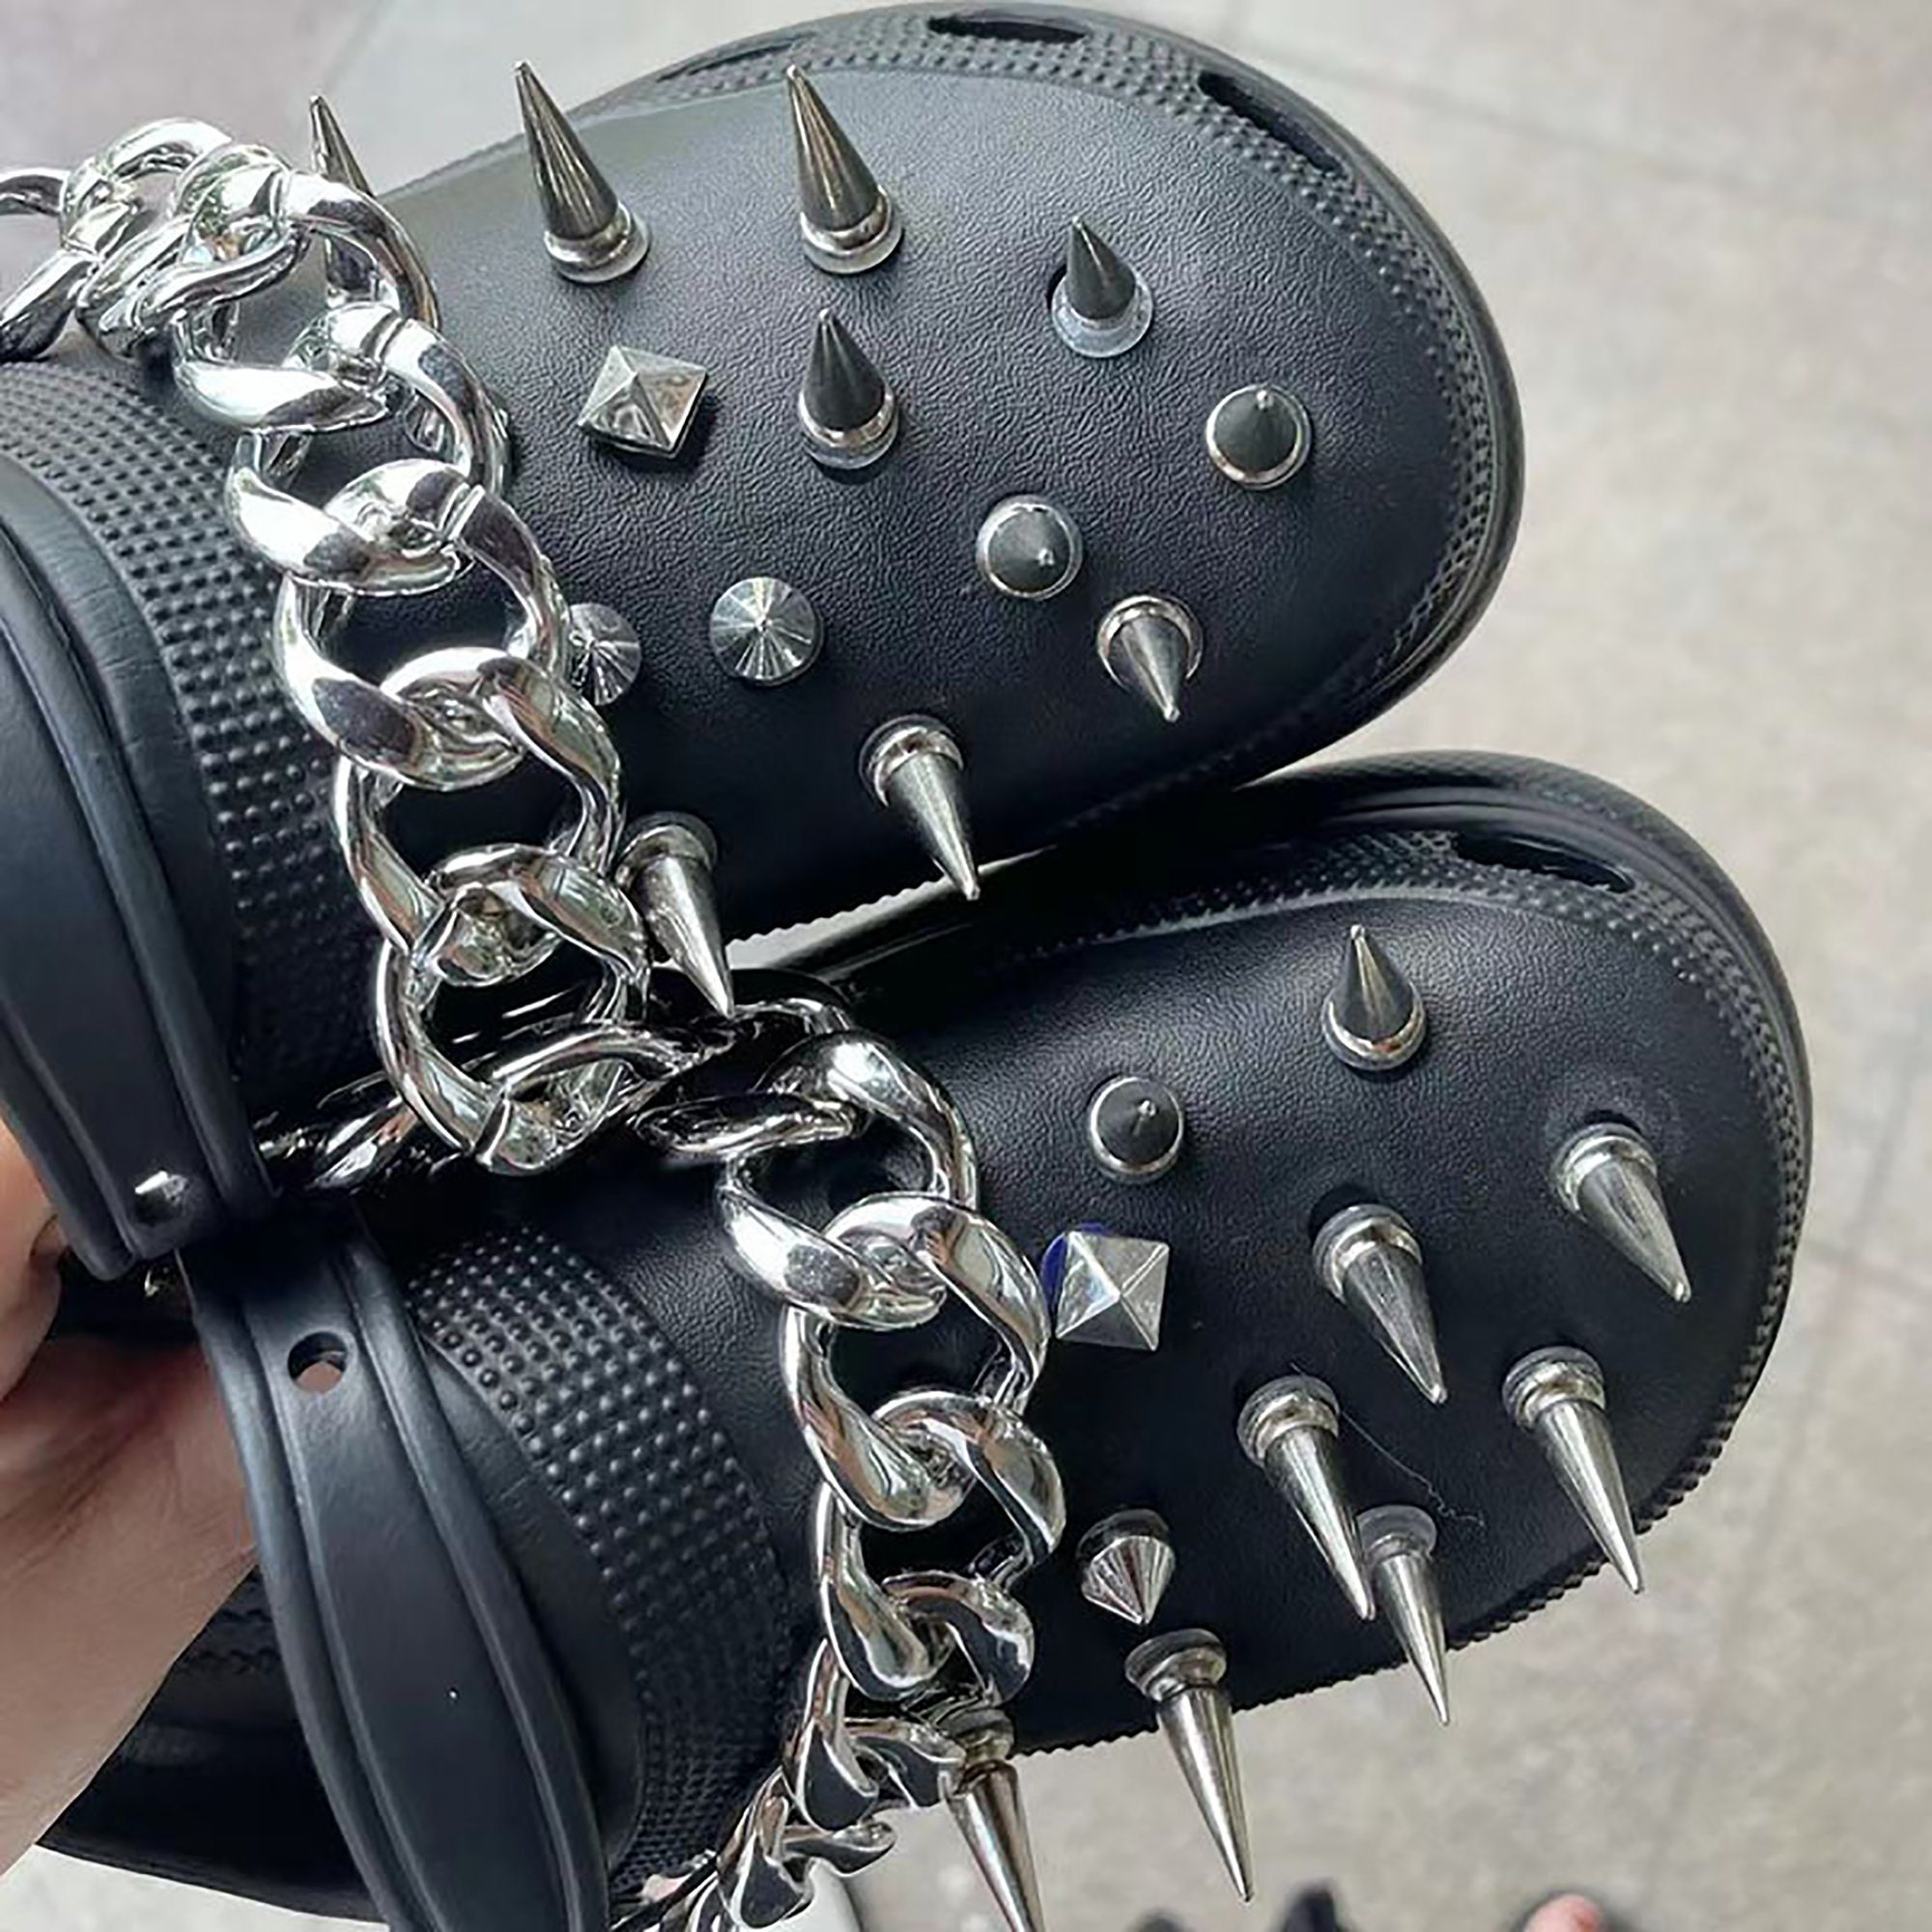 Goth Spikes Shoe Decorations Charms for Women Men Punk Gothic Shoe Accessories for Girls Boys Cool Charms Pack As Gift for Adults Teens